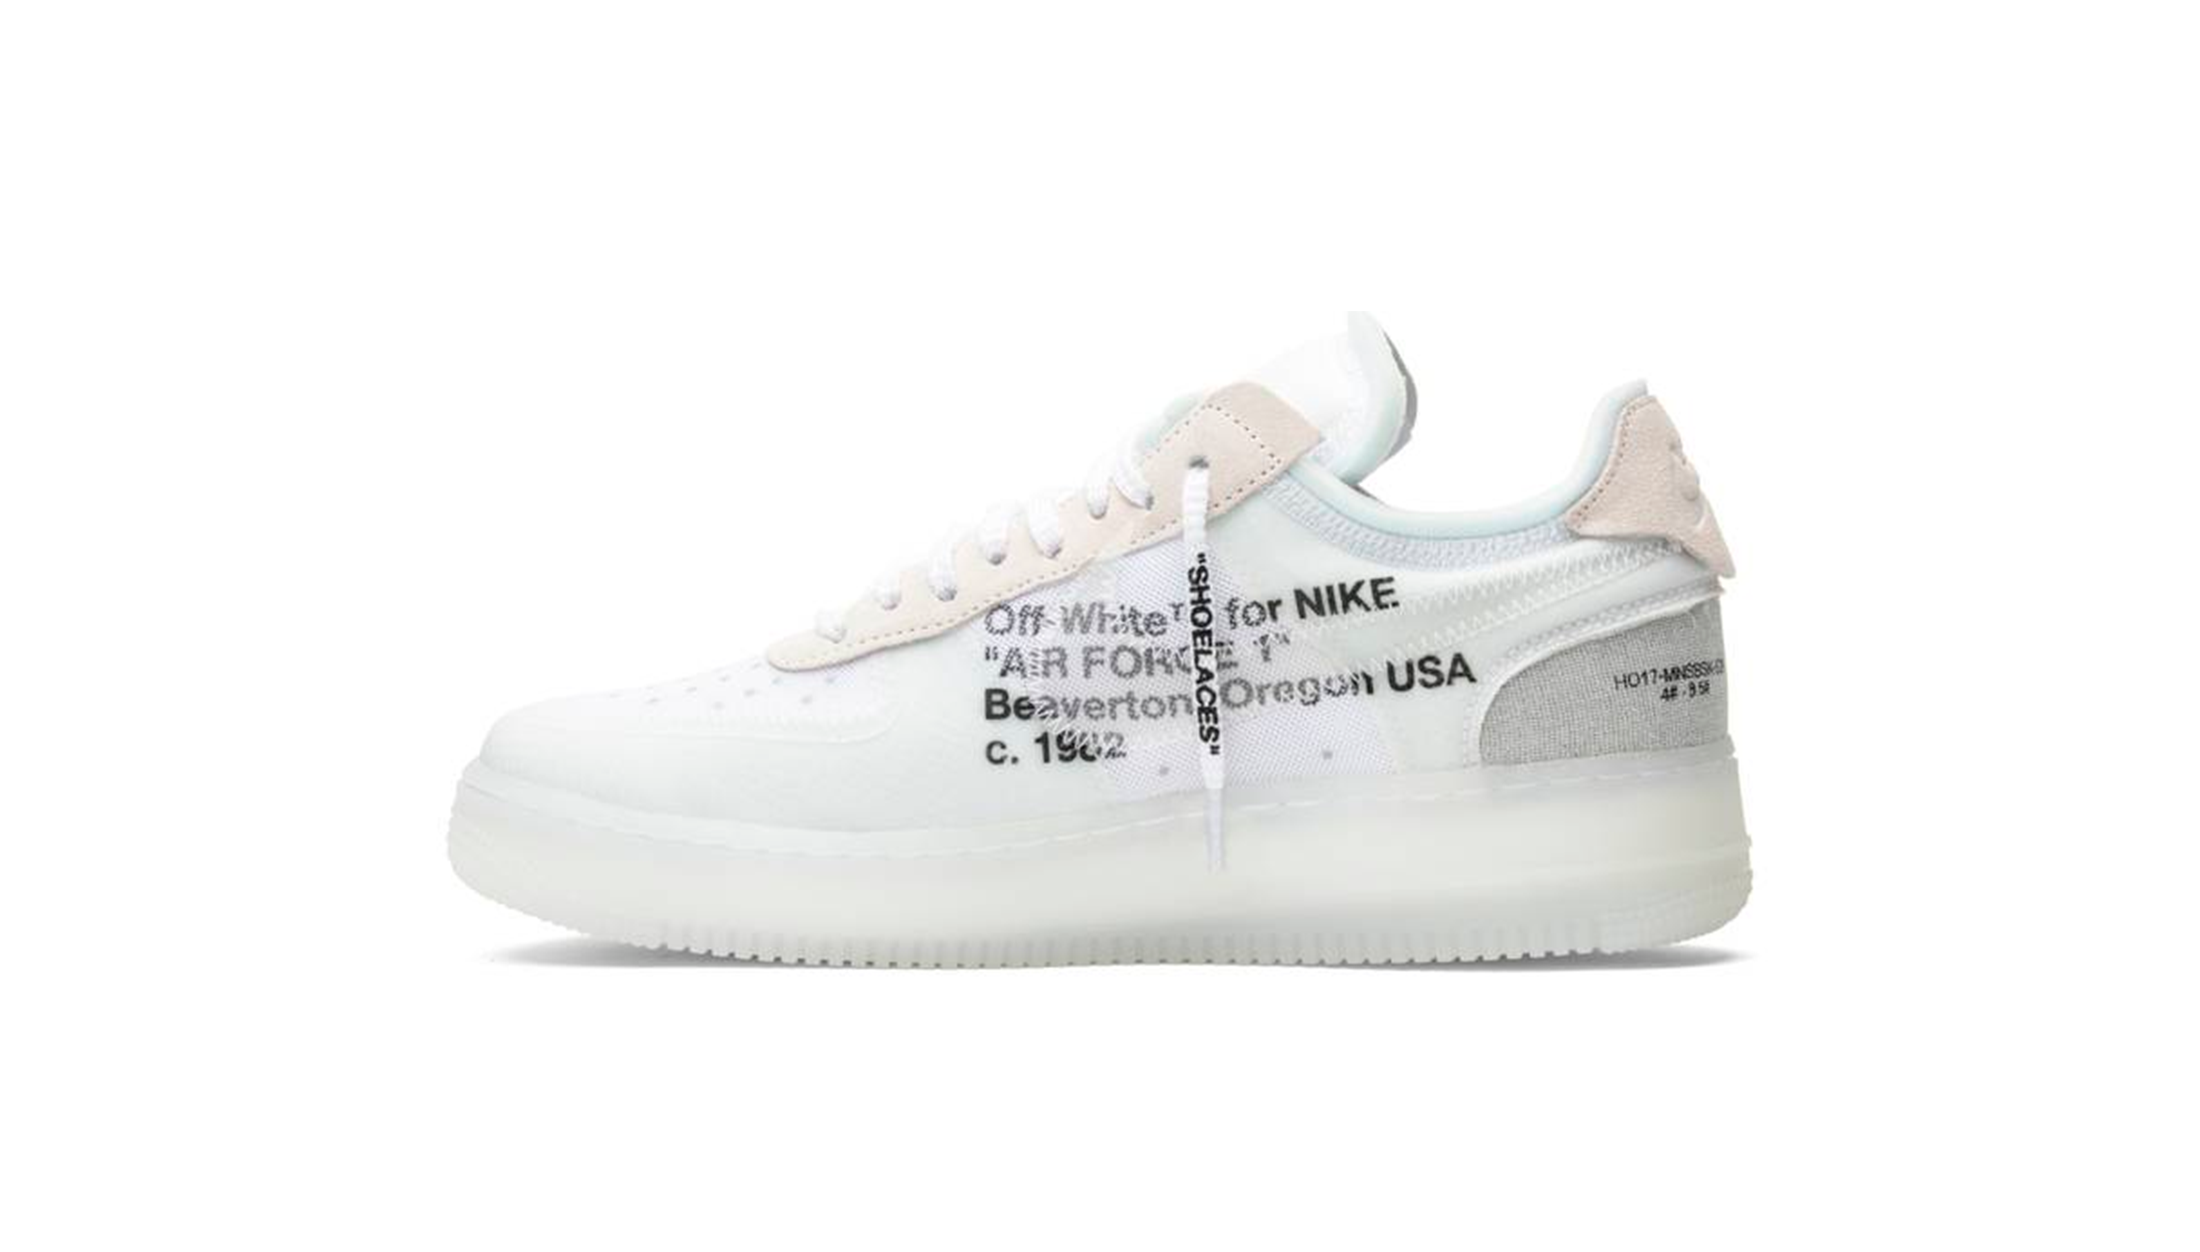 airforces off white